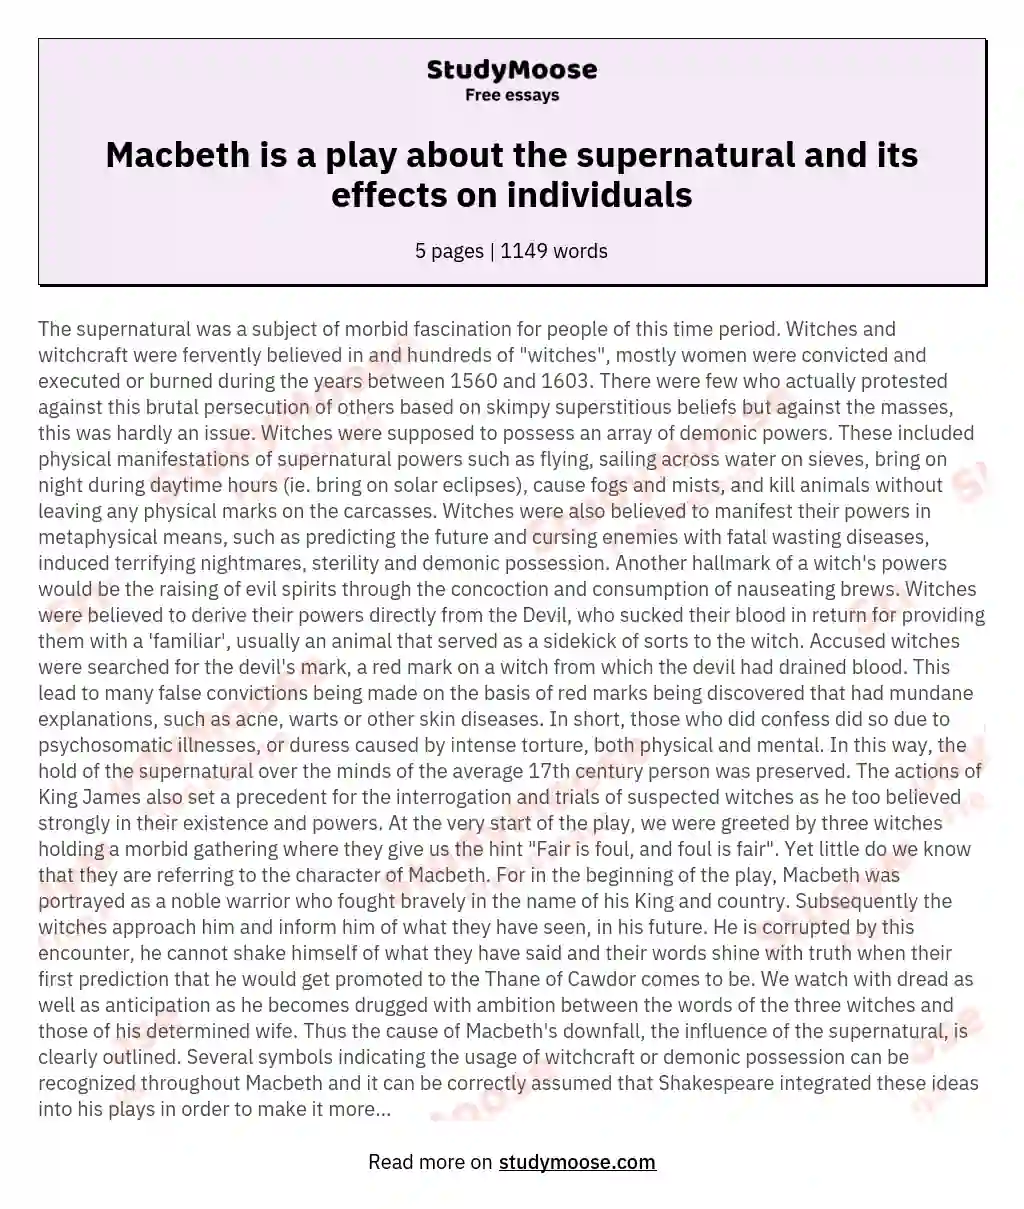 Macbeth is a play about the supernatural and its effects on individuals essay